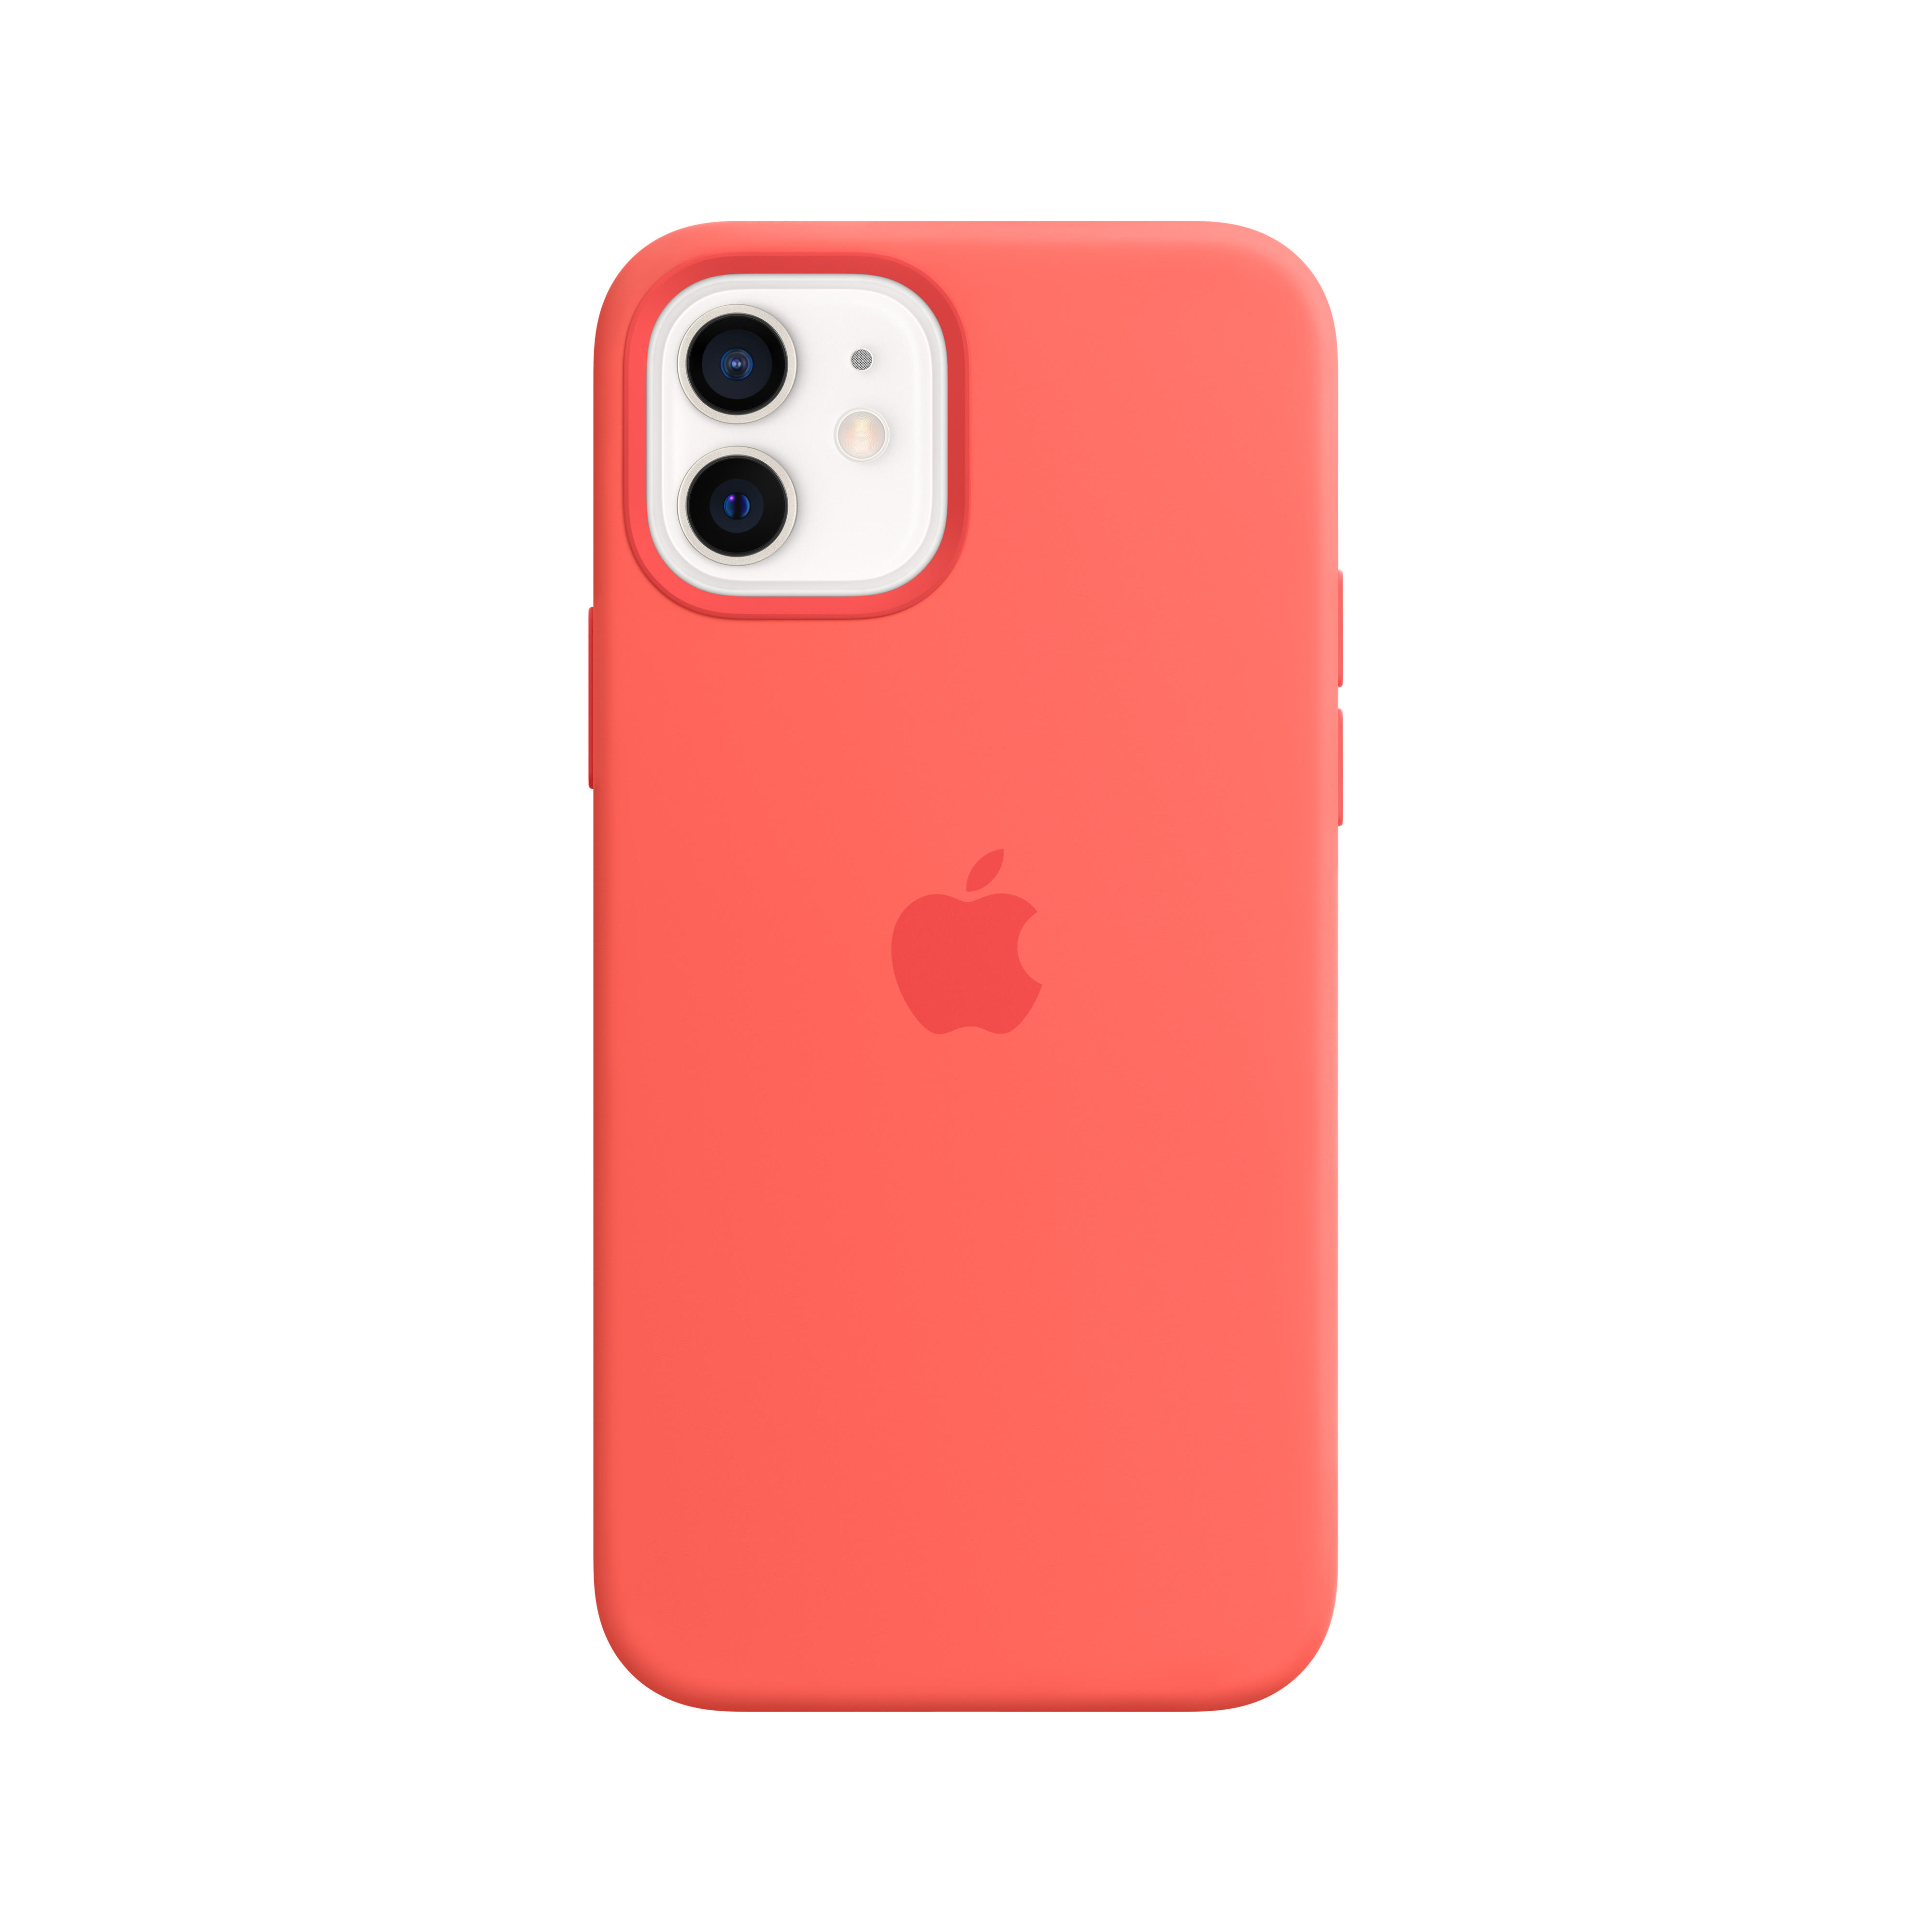 Mini, PinkCitrus iPhone 12 Backcover, mit Apple, MagSafe, MHKP3ZM/A APPLE